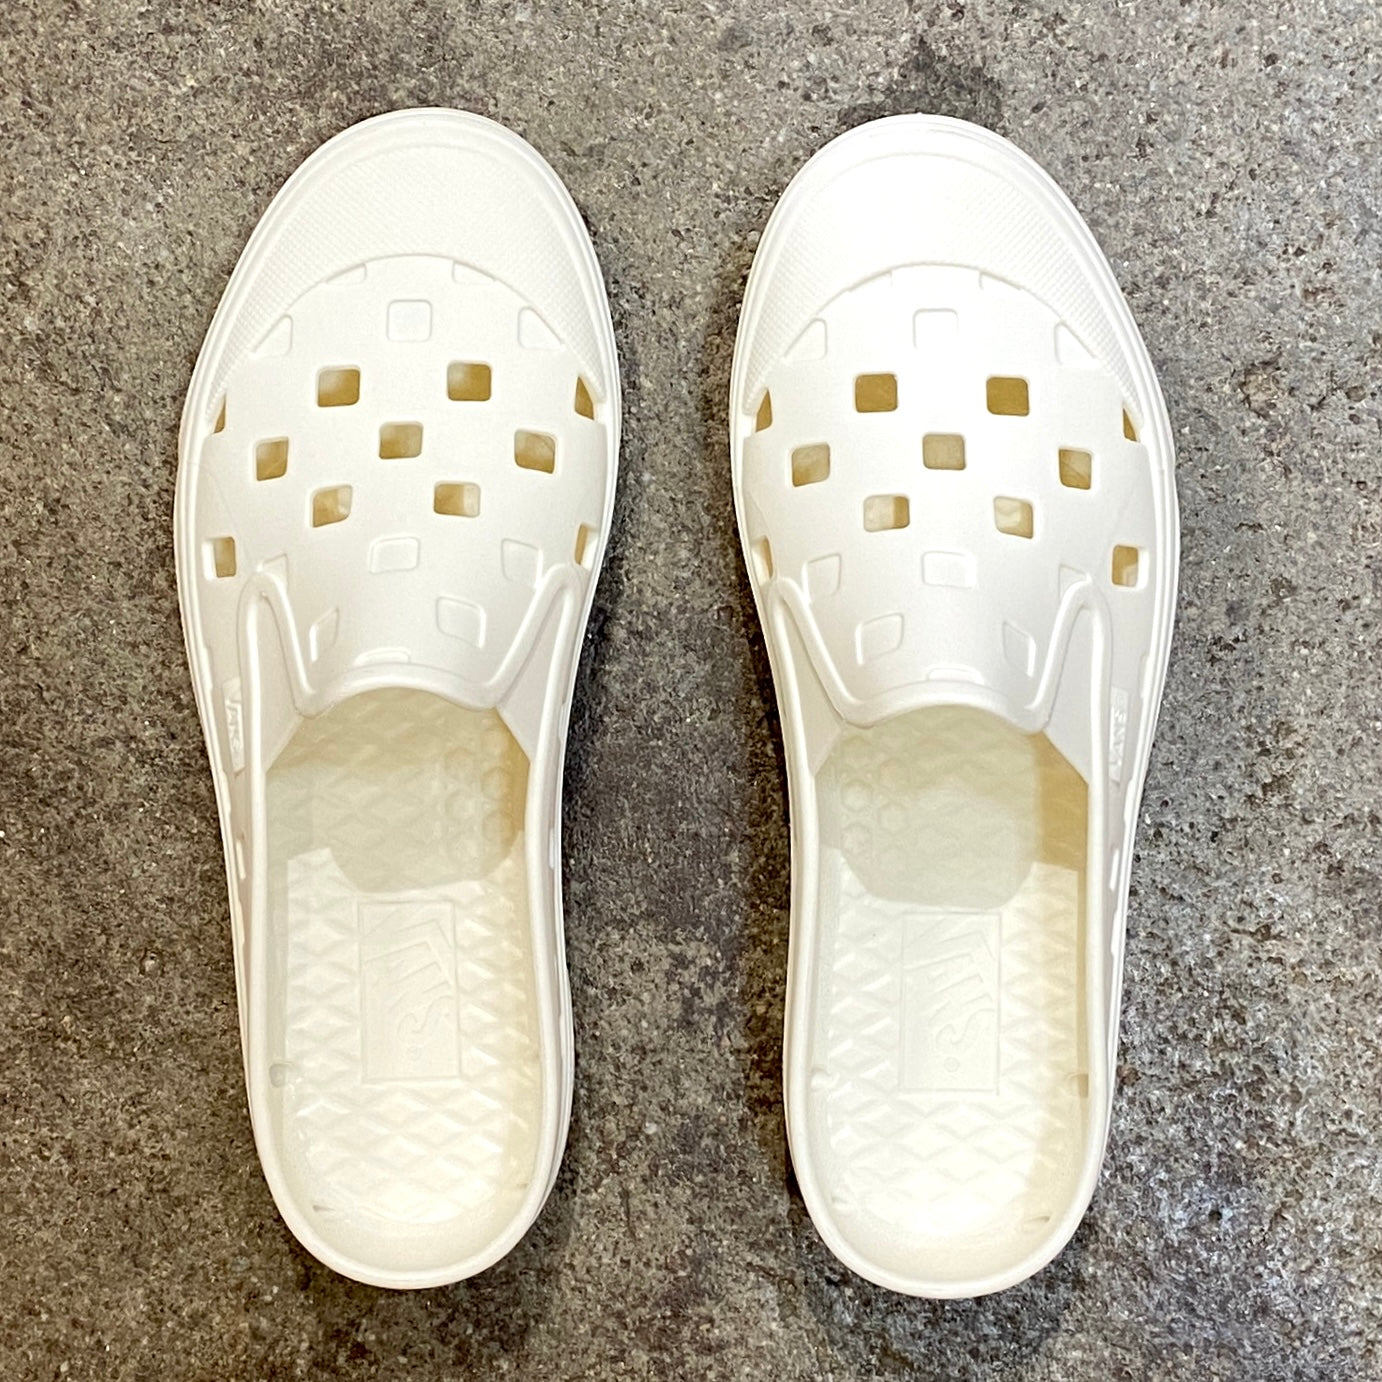 VANS SLIP-ON TRK AT KISS SURF STORE IN CAPE TOWN, SOUTH AFRICA – KEEP IT  SIMPLE SURF